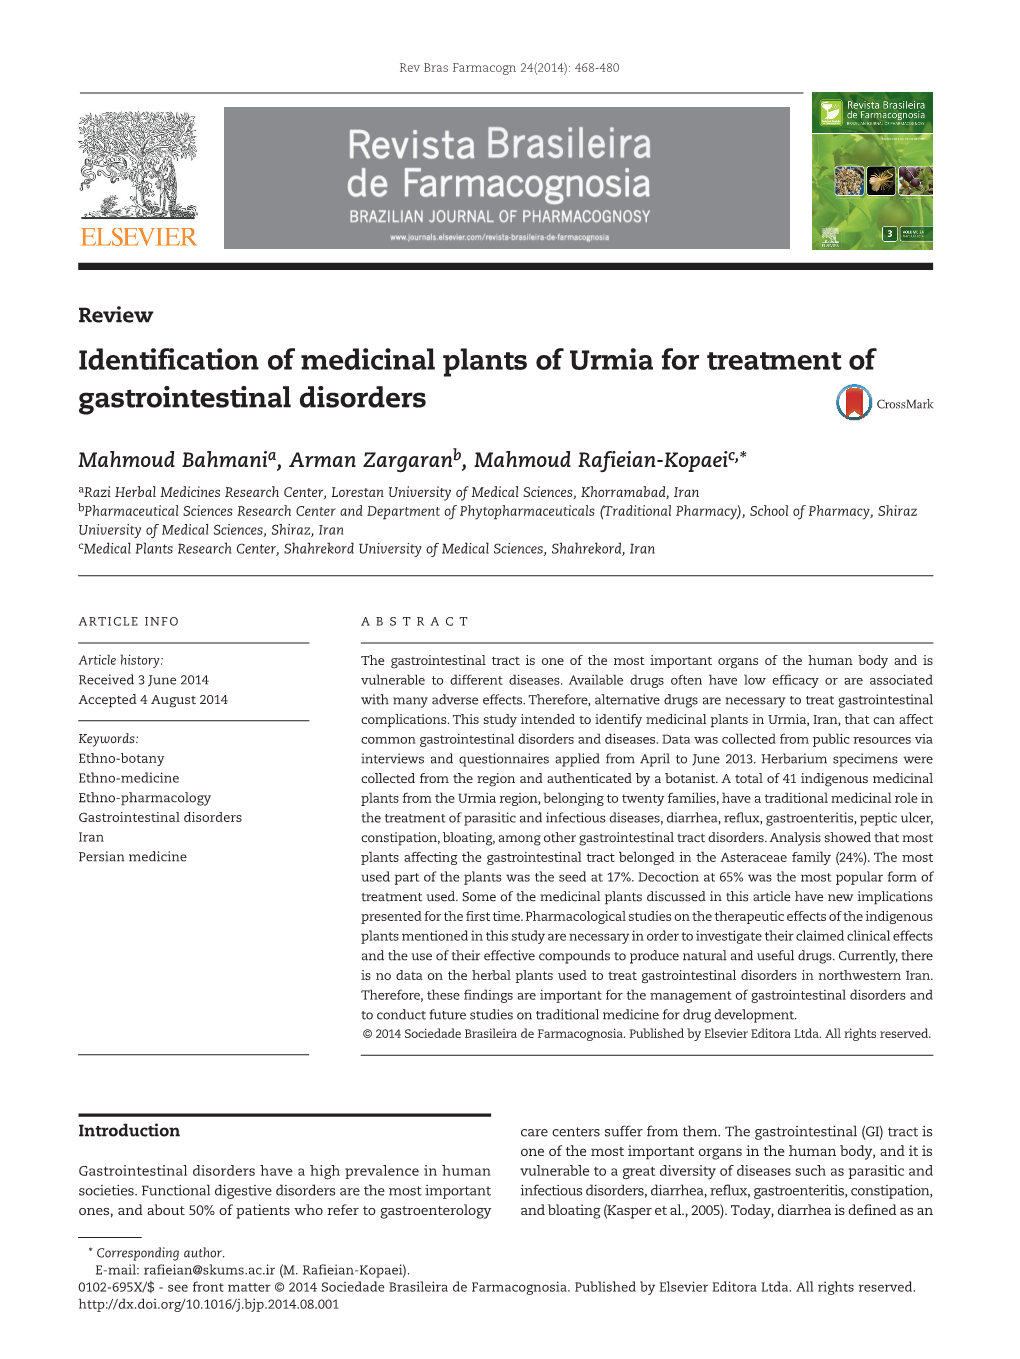 Identification of Medicinal Plants of Urmia for Treatment of Gastrointestinal Disorders